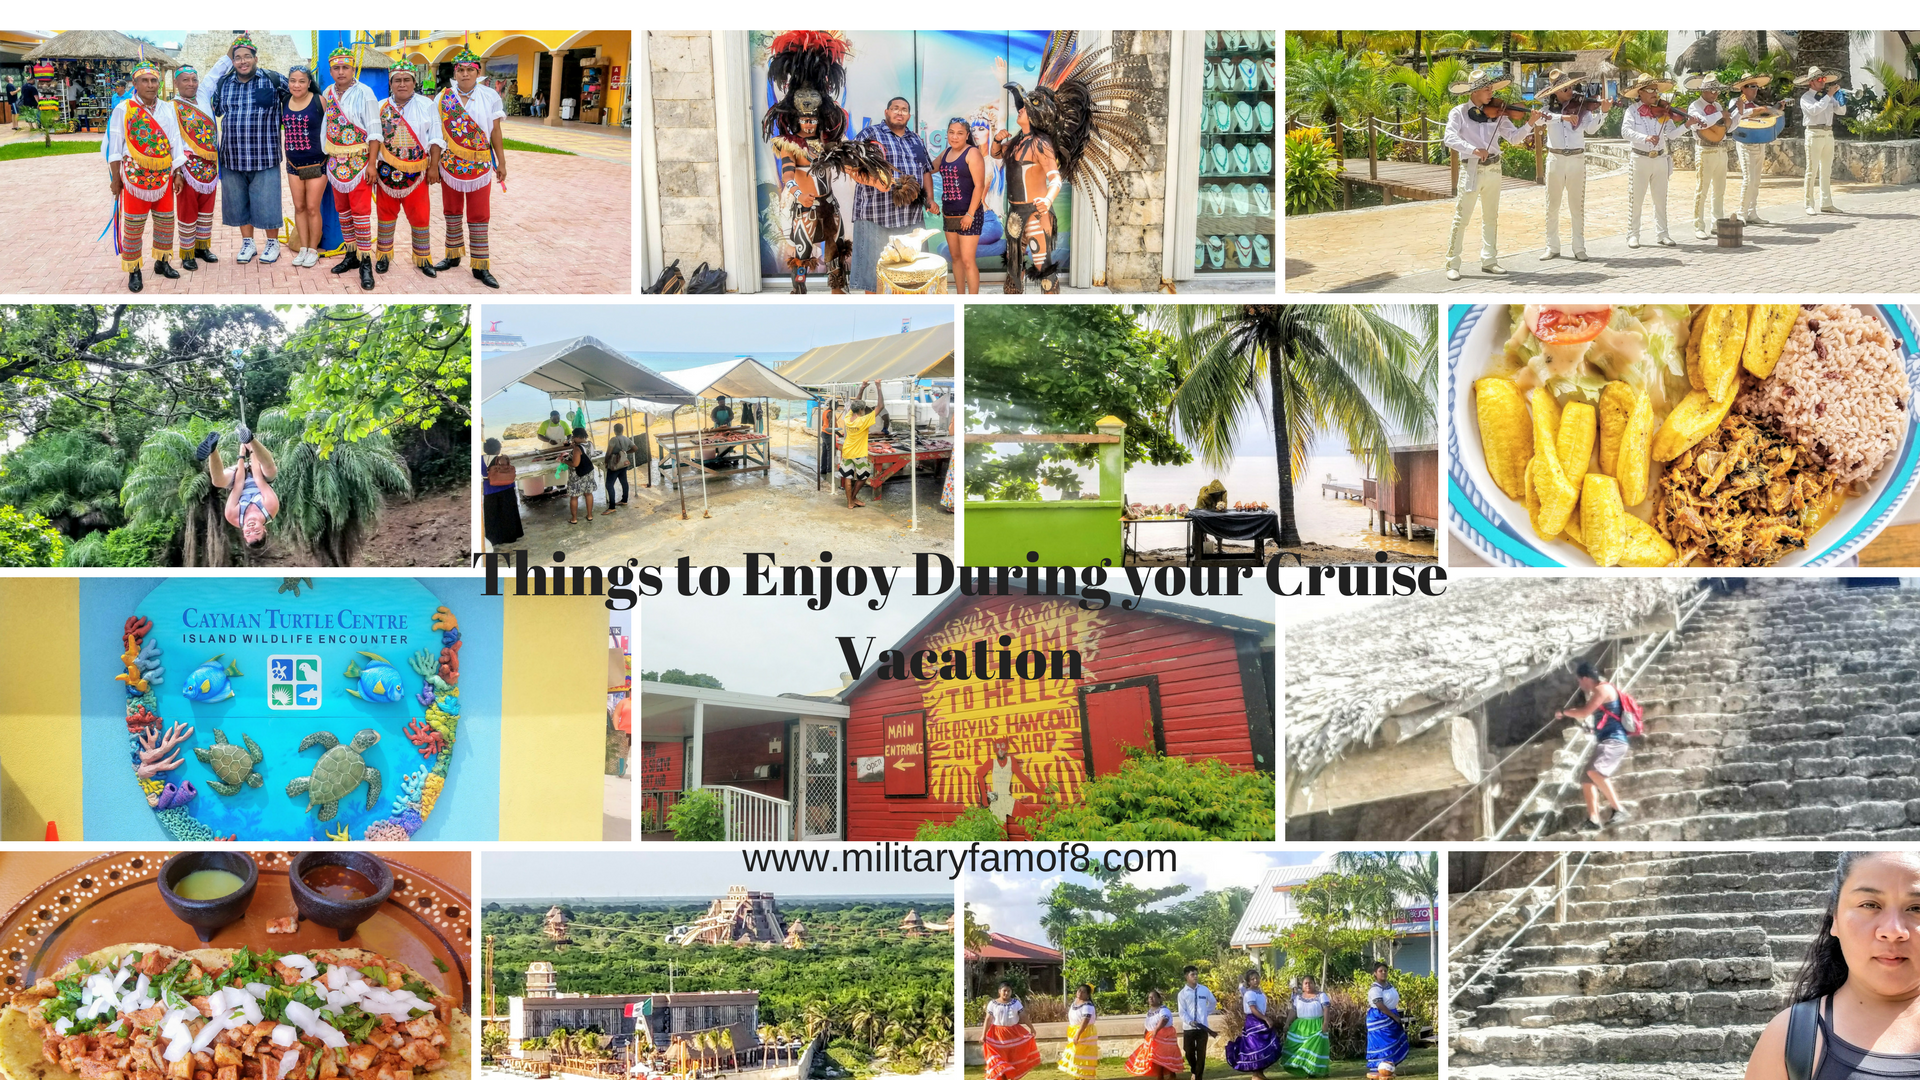 The Ultimate List of Things to Enjoy During your Cruise Vacation. From Amazing Animal Encounters to All-Inclusive Resorts, this Post Will Help You Plan the Ultimate Cruise! #Travel #cruise #cruisetravel